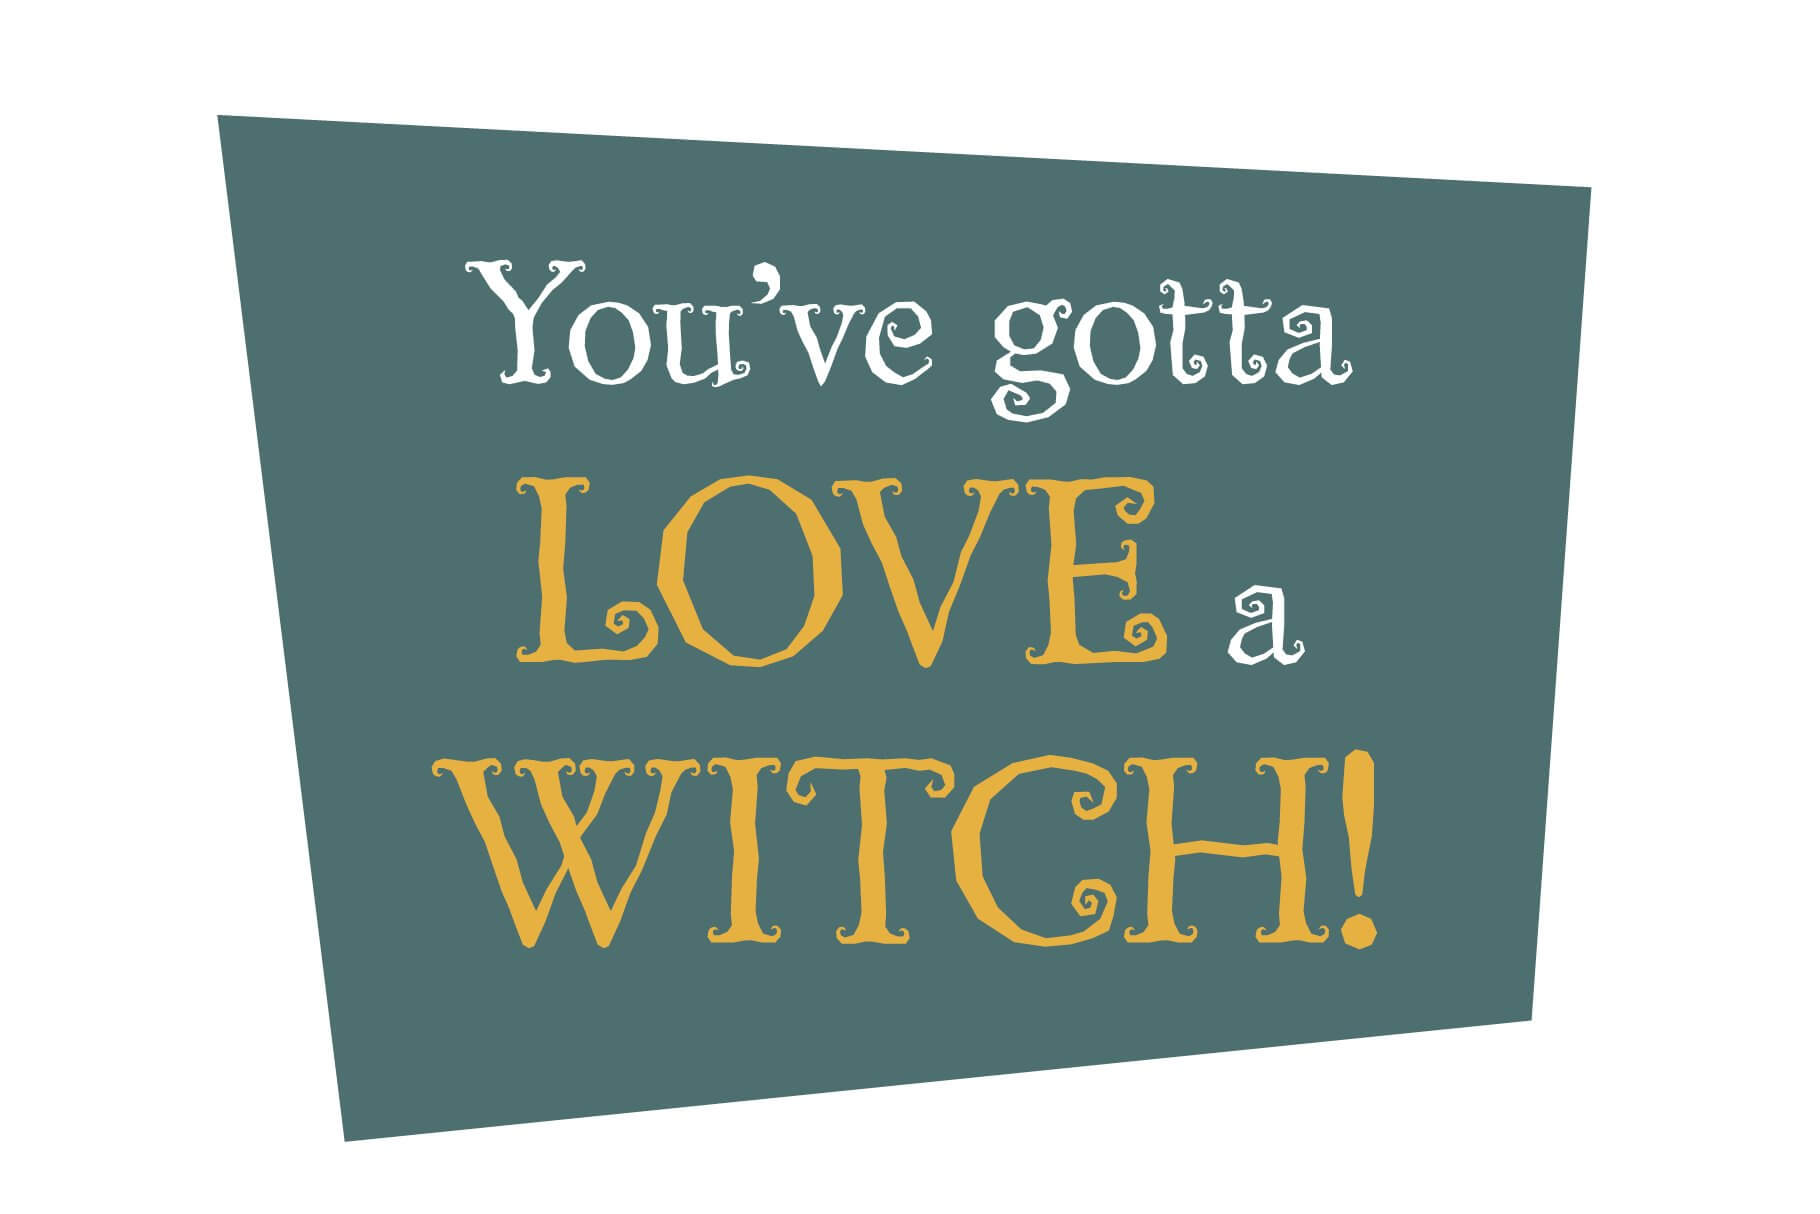 billy witch beautiful swirly handwritten font for personal use.